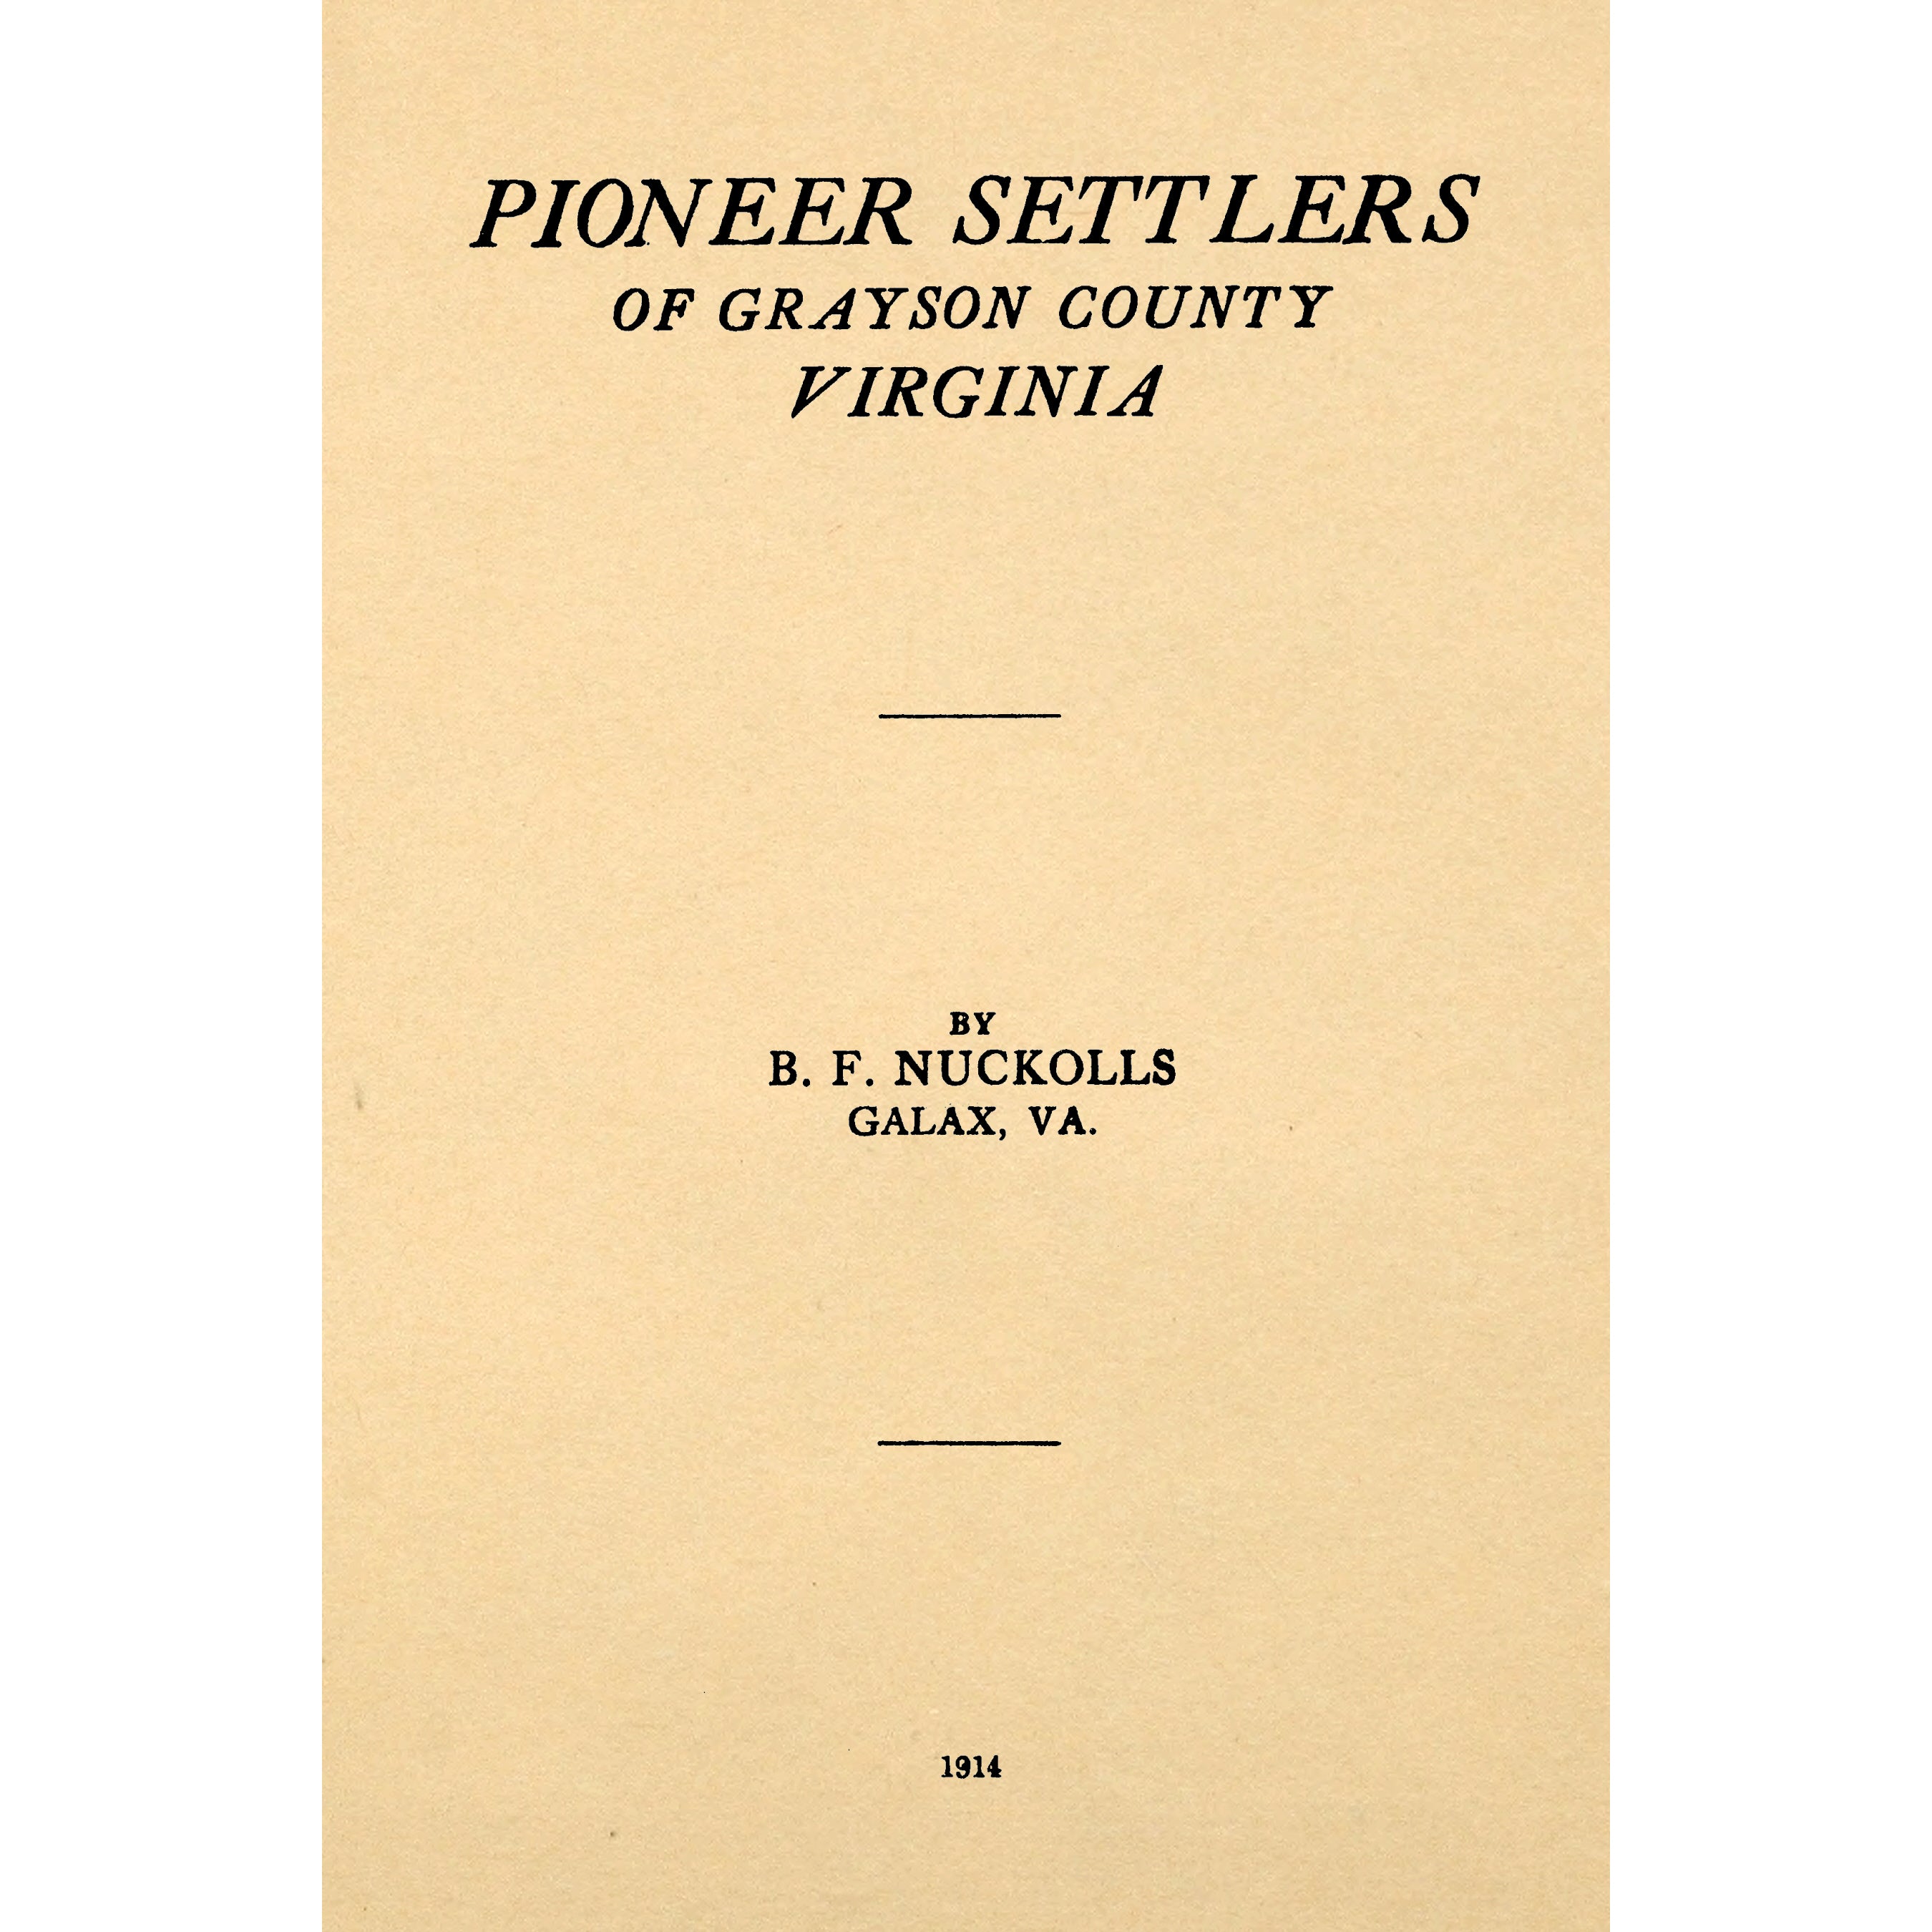 Pioneer settlers of Grayson County, Virginia